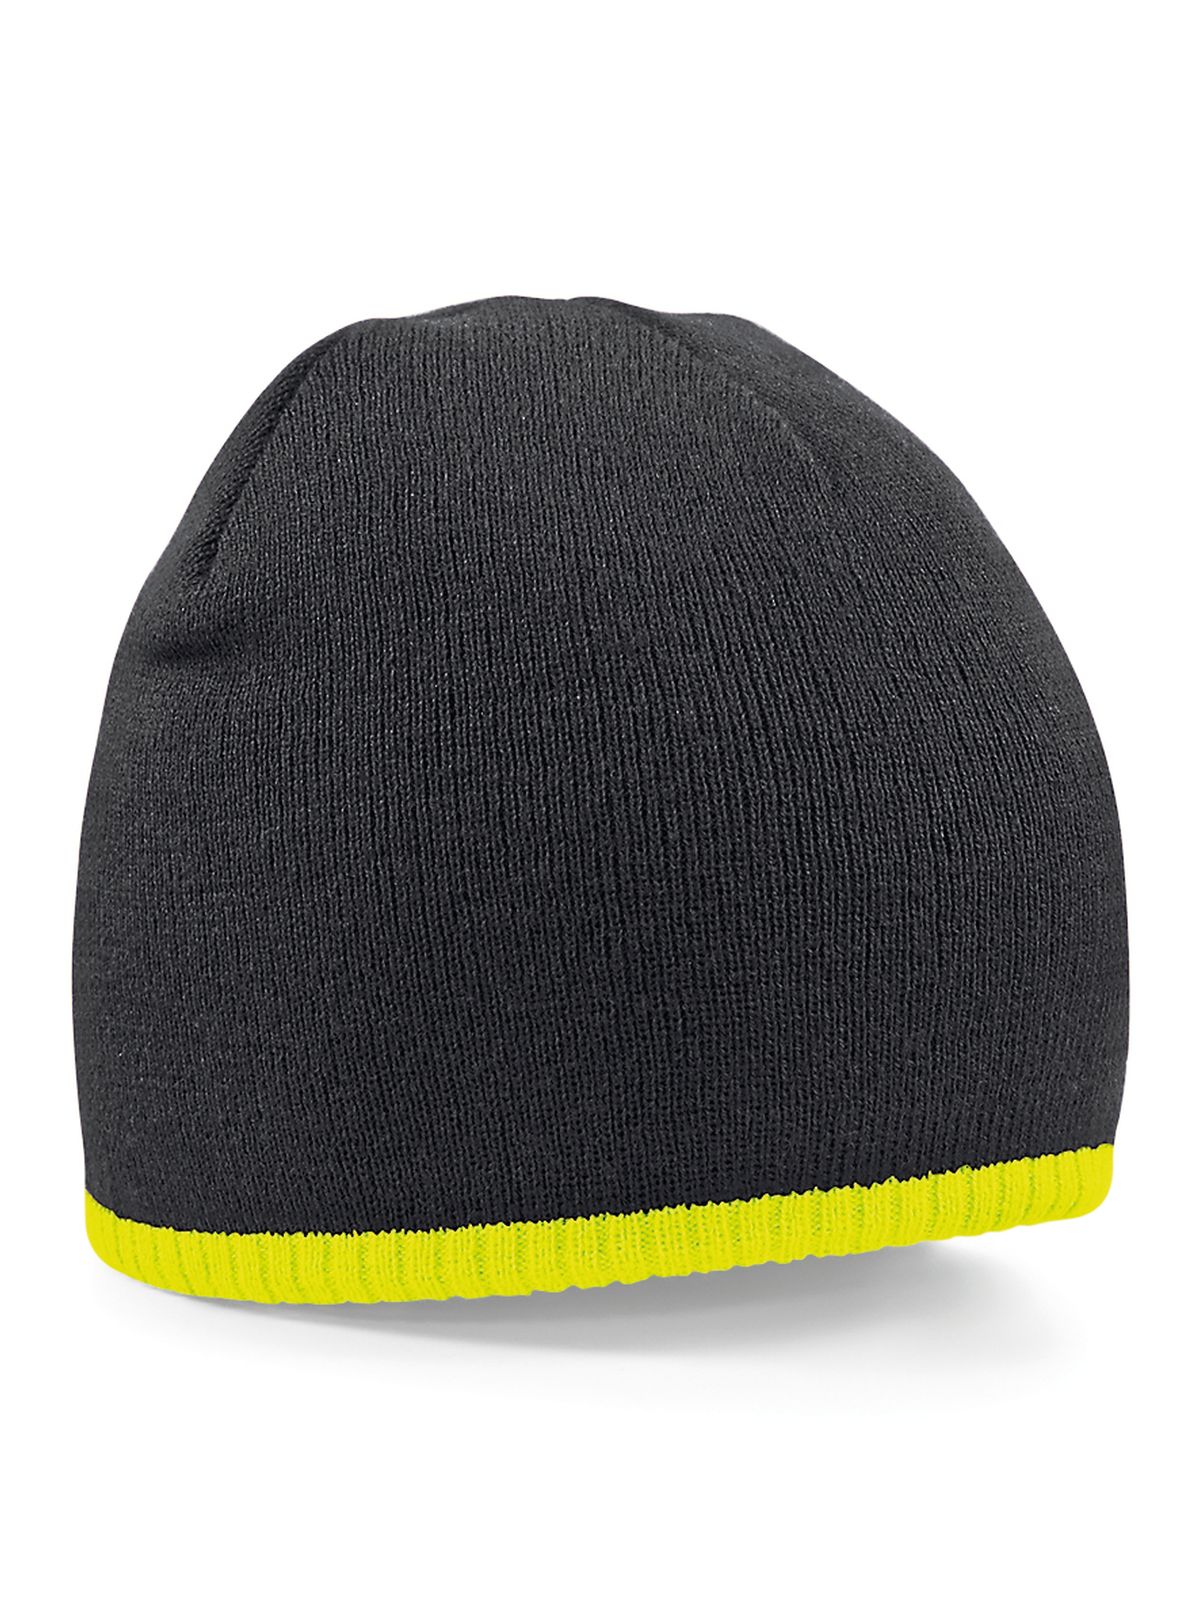 two-tone-pull-on-beanie-black-fluorescent-yellow.webp